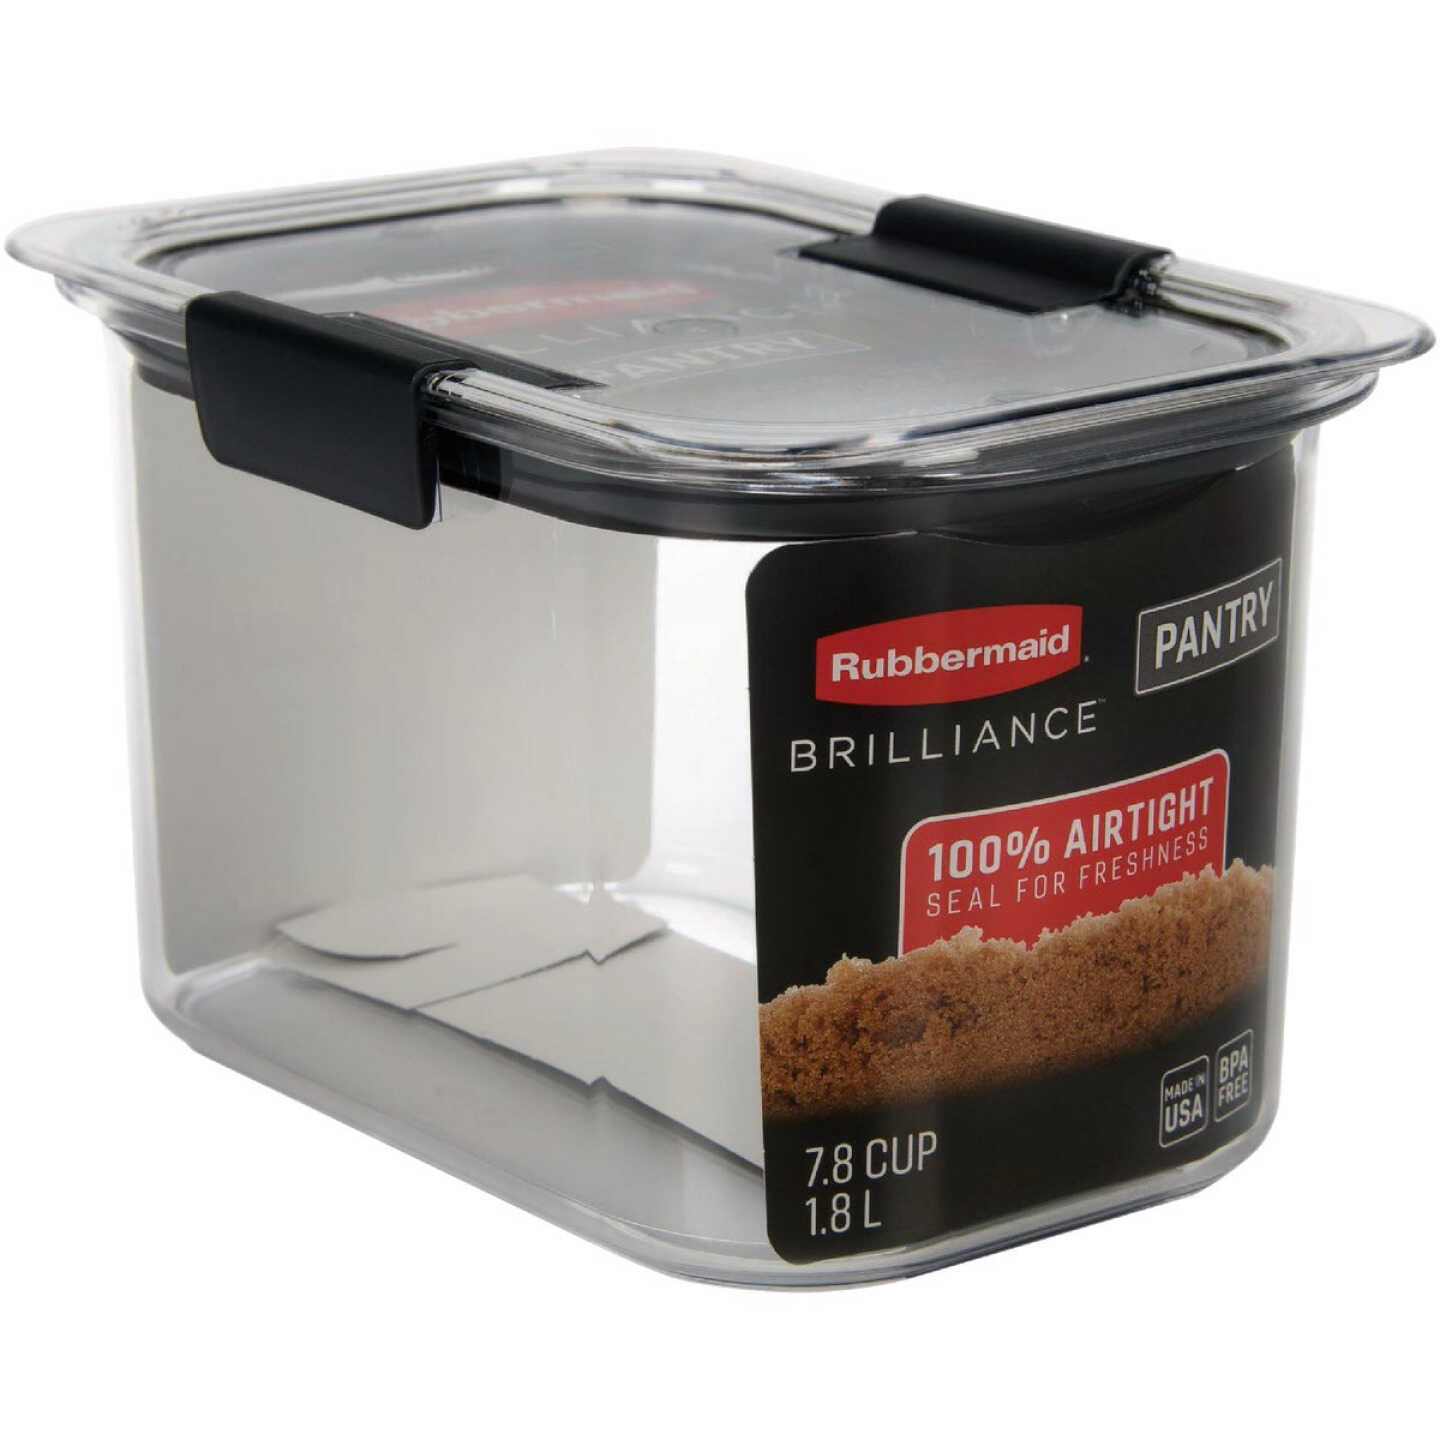 Rubbermaid Brilliance Plastic Food Storage Pantry Set of 14 Containers with Lids (28 Pieces Total)